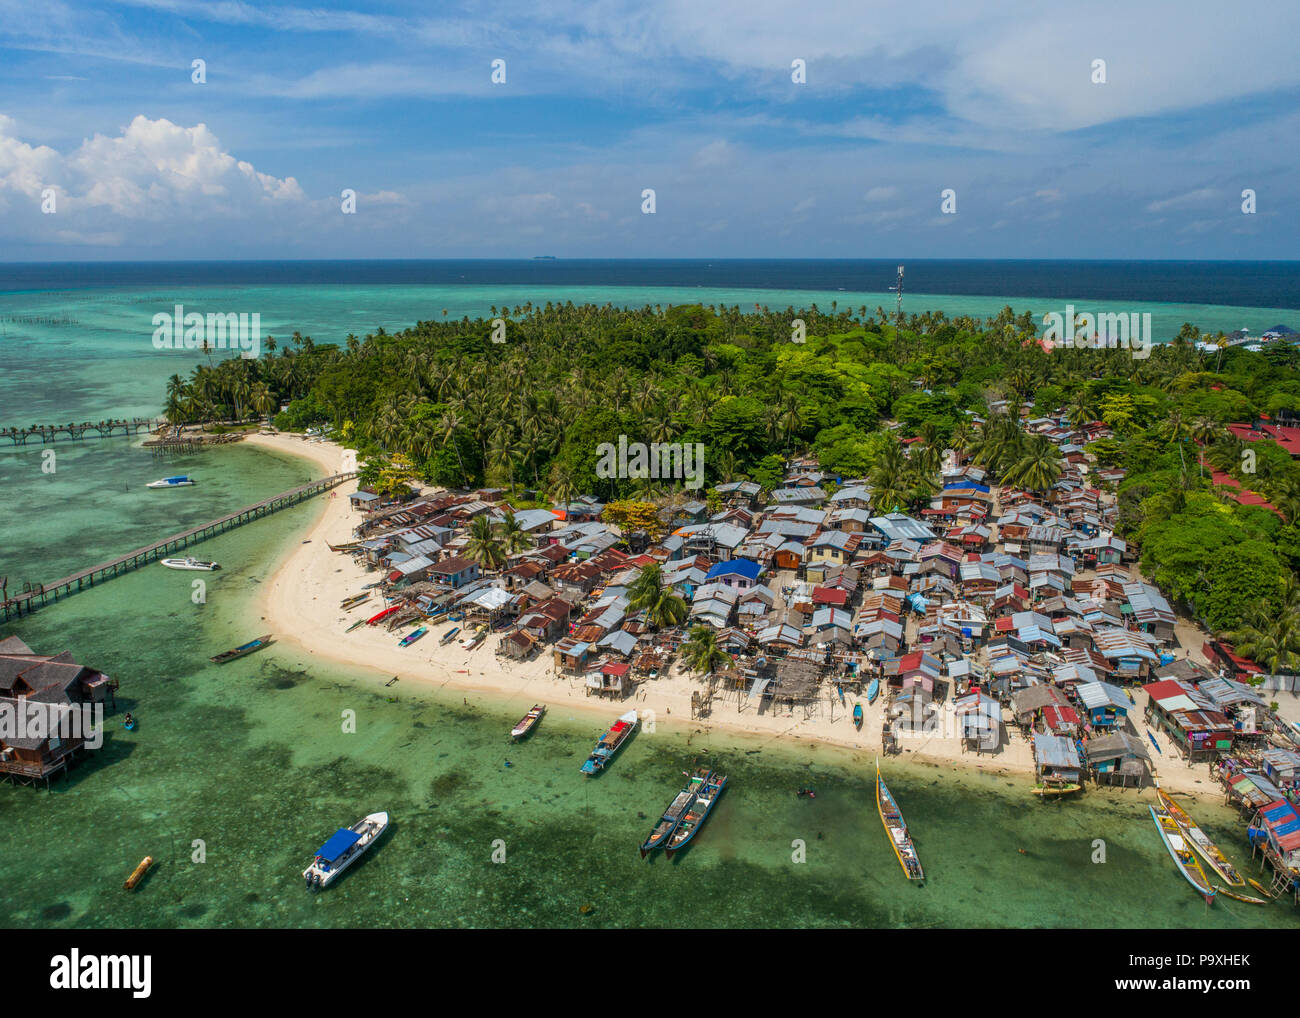 Drone photo of a very poor Bajau sea gypsy village at Mabul Island, Sabah, Malaysia, (Borneo), with tropical sea, blue sky & clouds in the background. Stock Photo